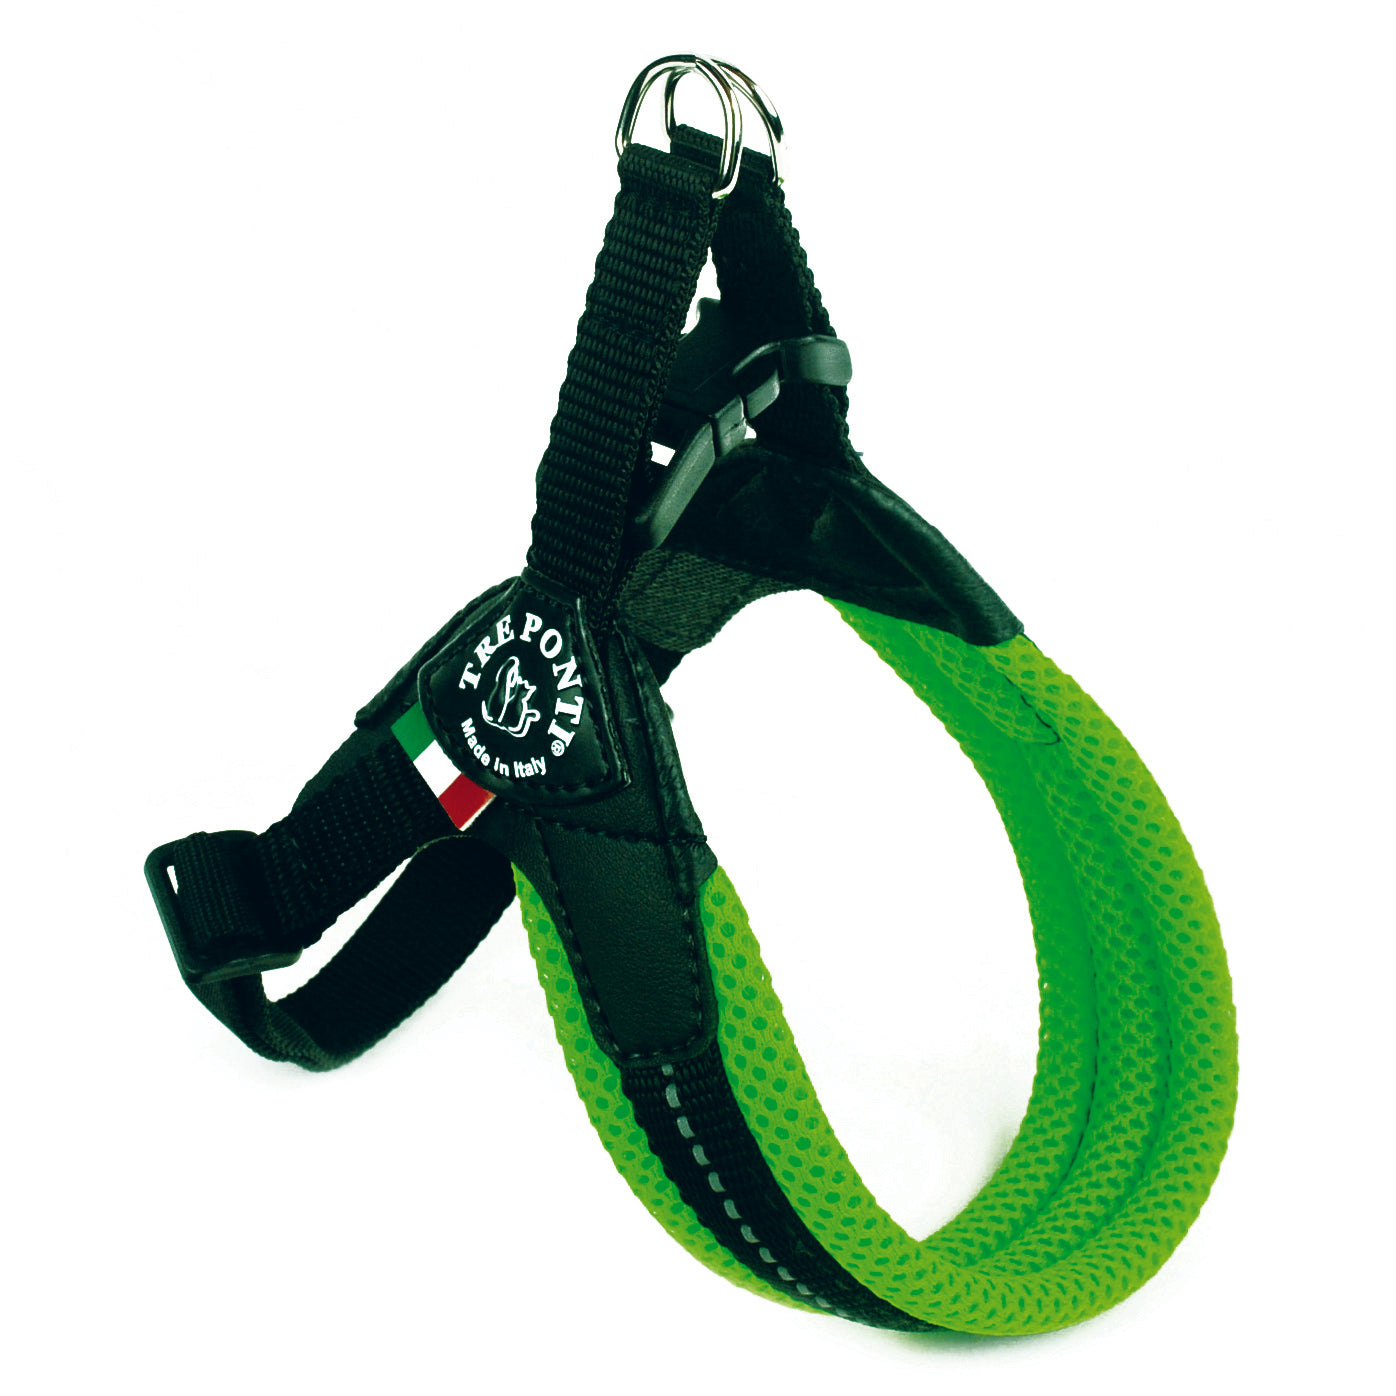 Easy Fit Fluro Green Mesh Harness with Adjustable Girth